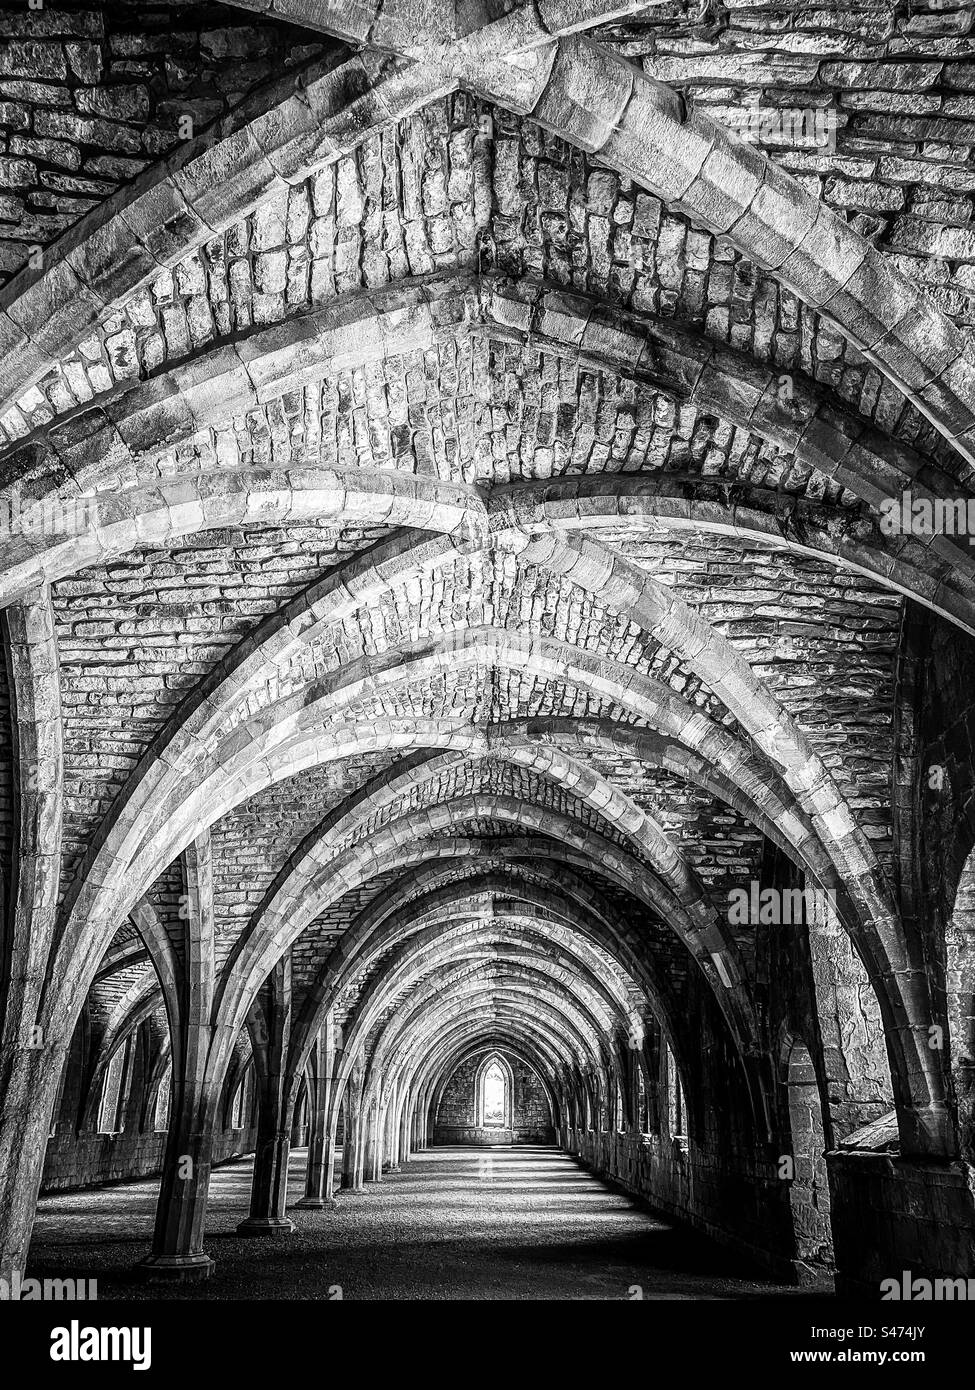 The Great Cloisters at Fountains Abbey, Ripon, North Yorkshire Stock Photo